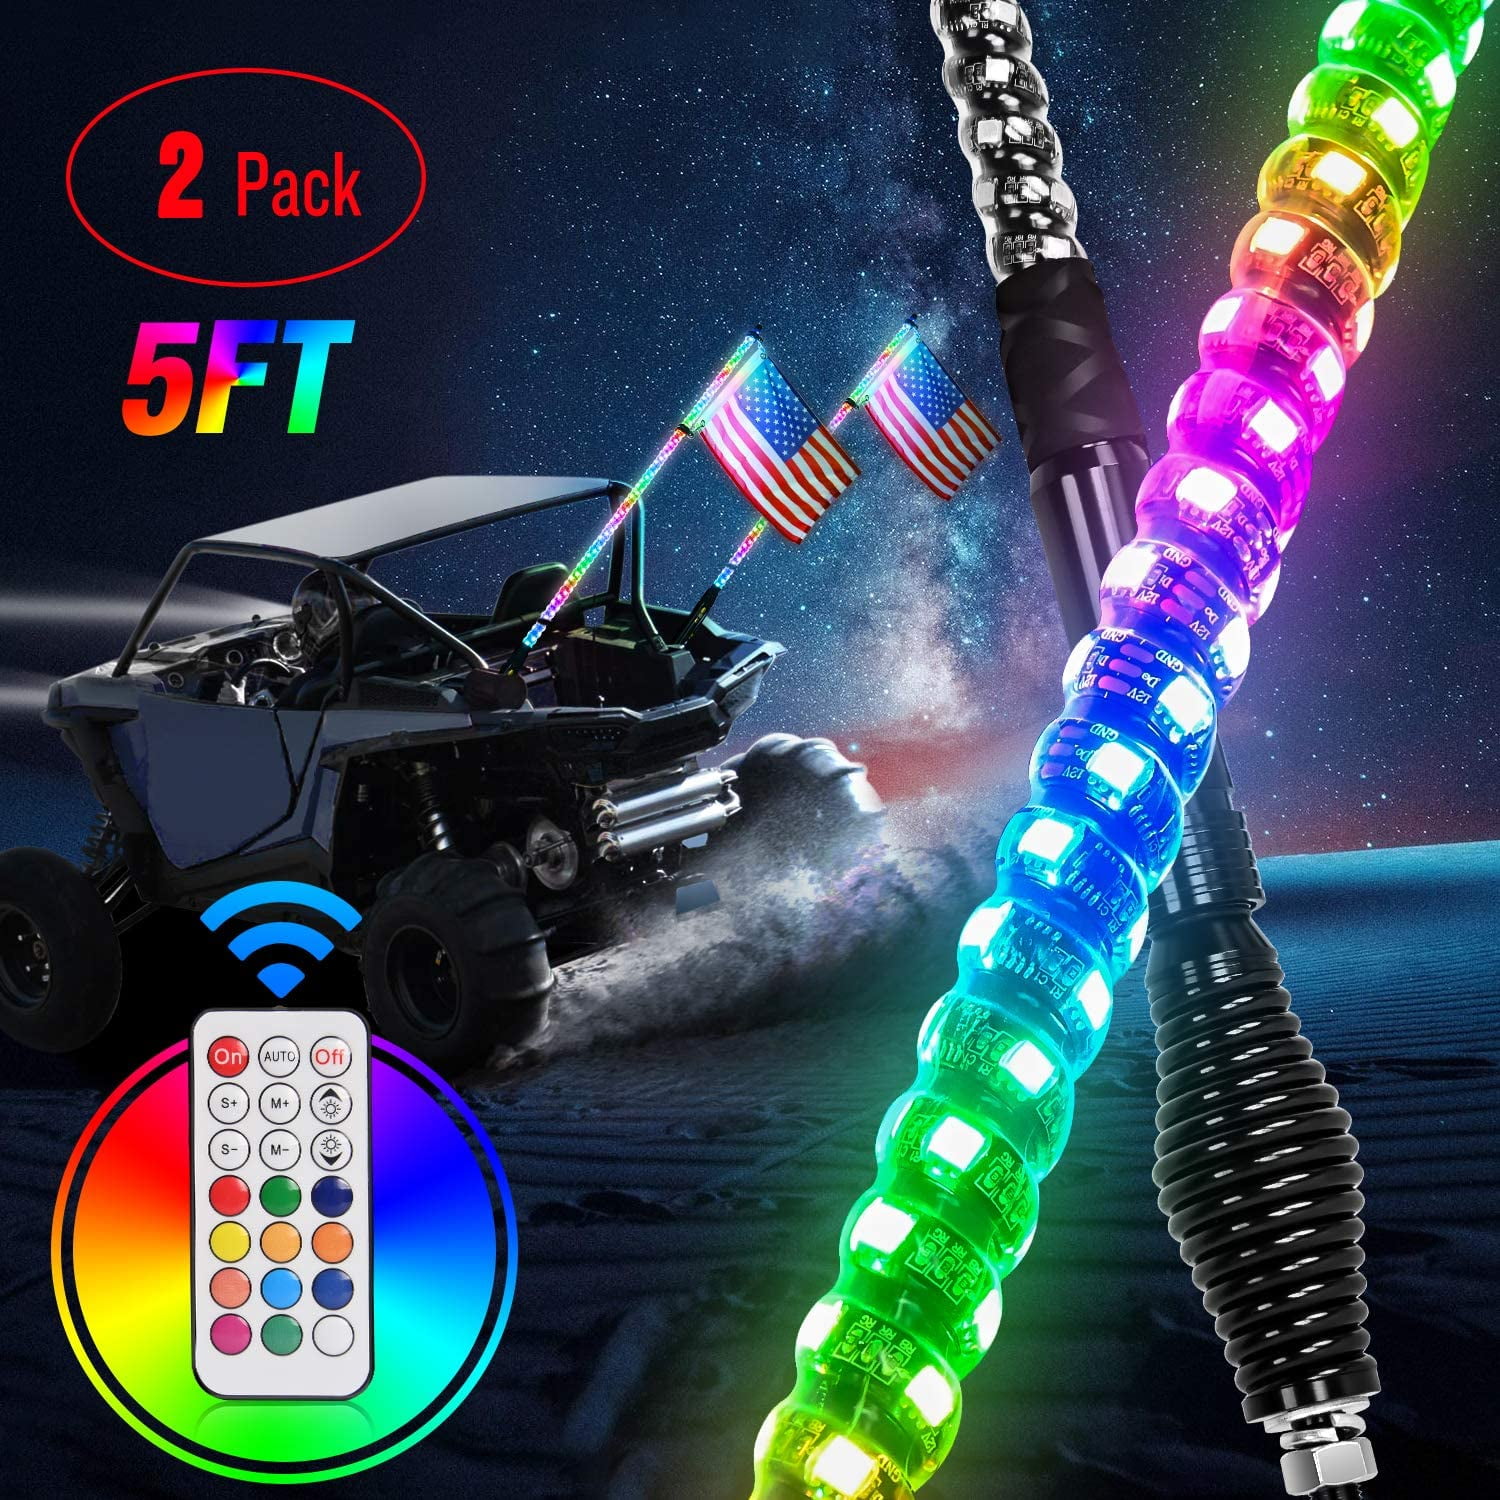 AddSafety 5FT RF Remote Control LED Whips Light With Dacning/Chasing Light with Hookup and American Flag For Off Road Vehicle ATV UTV RZR Jeep Trucks Dunes 